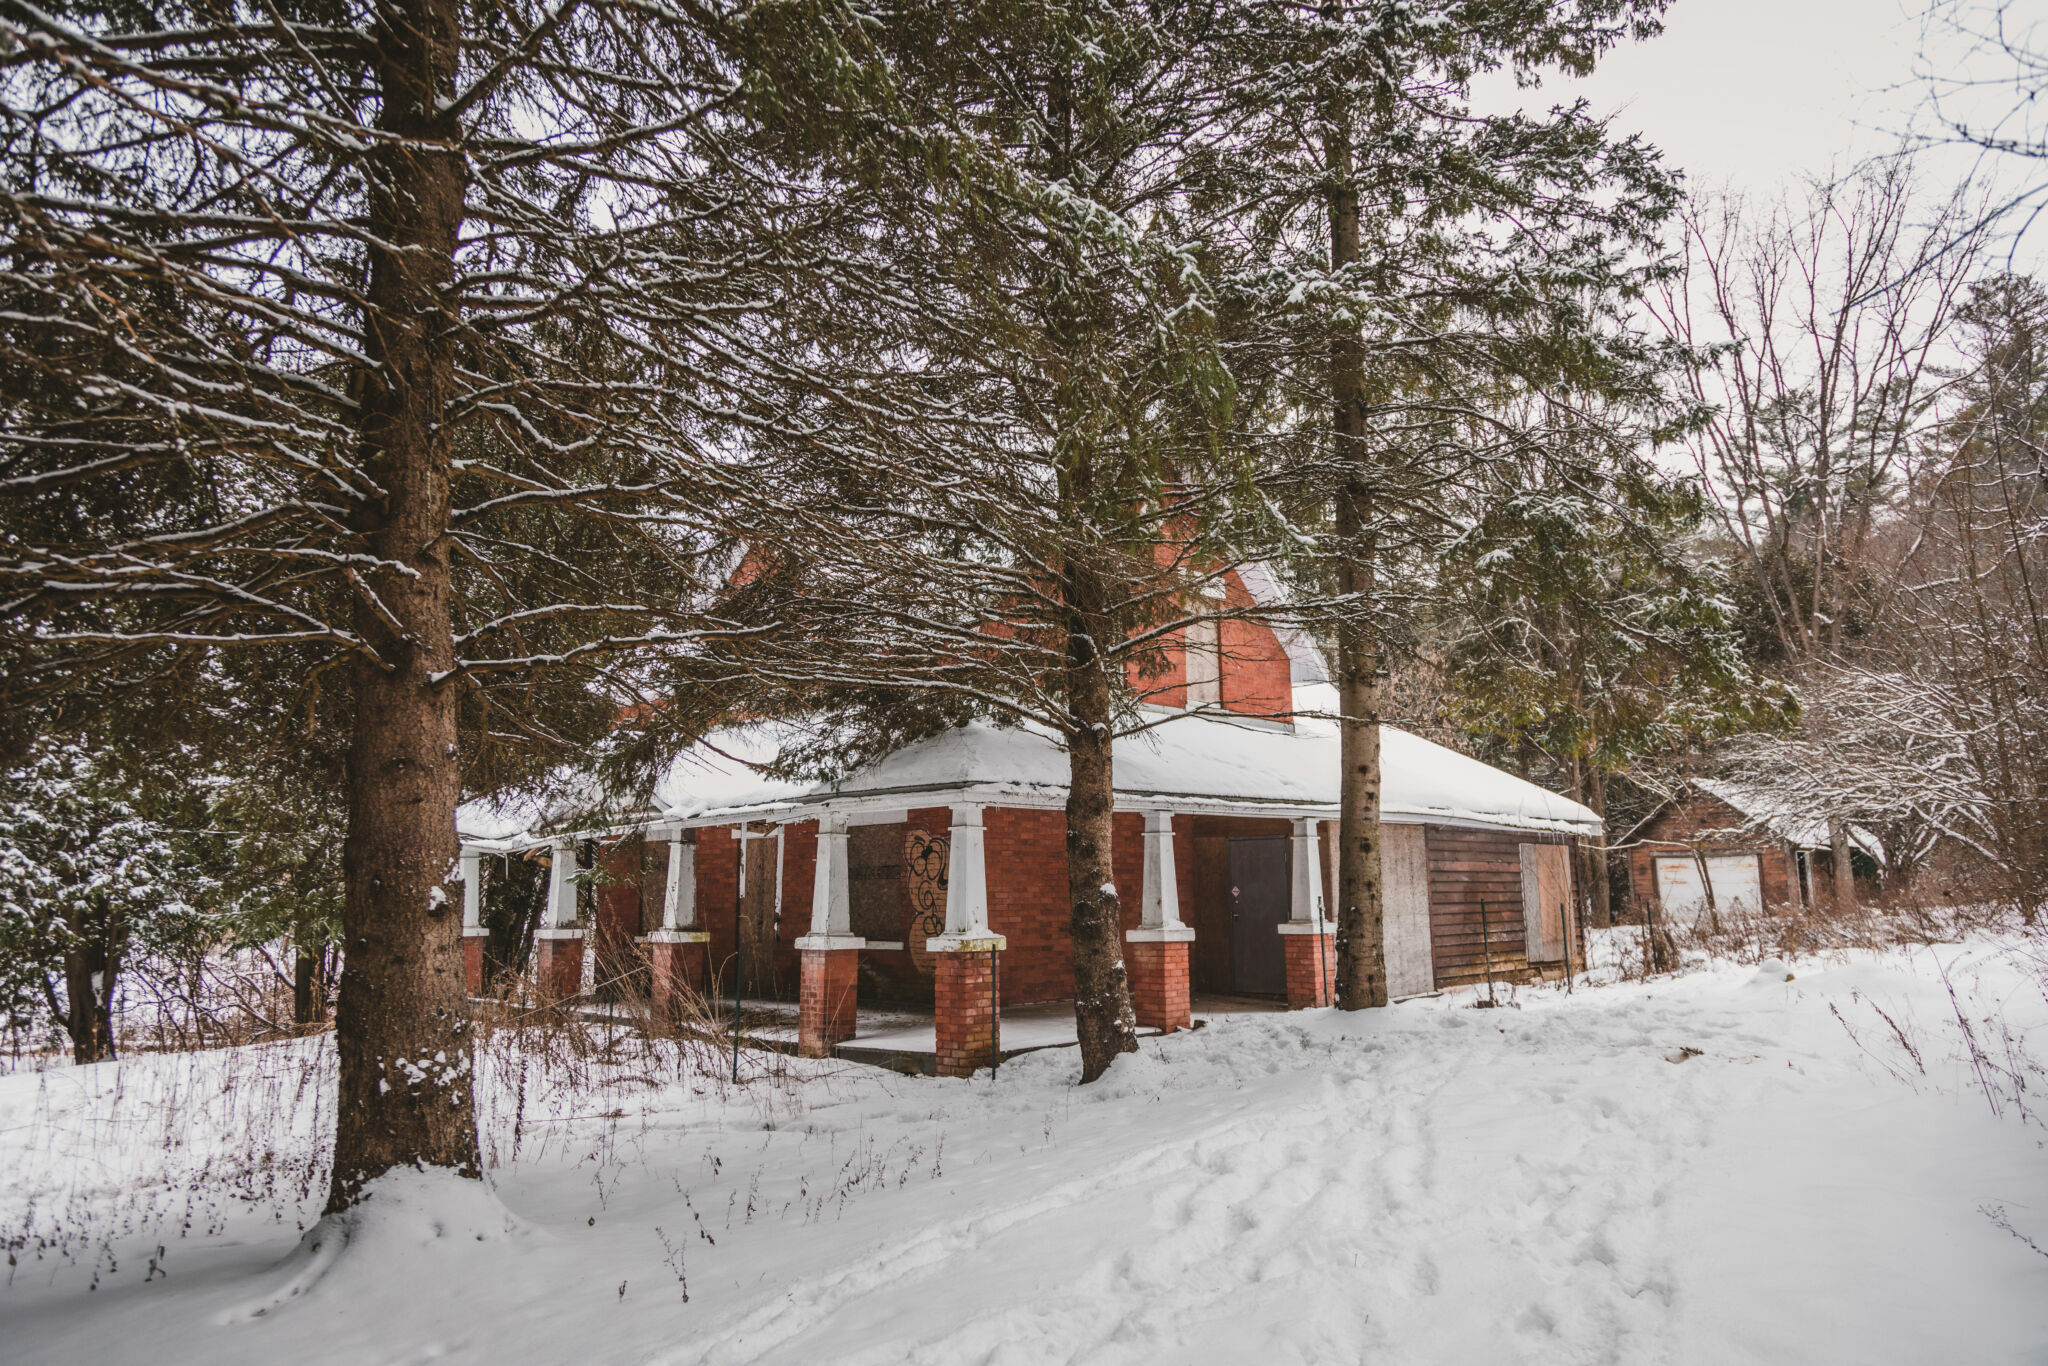 Brick house with covered porch on the front and side facade, surrounded by mature trees, in winter.